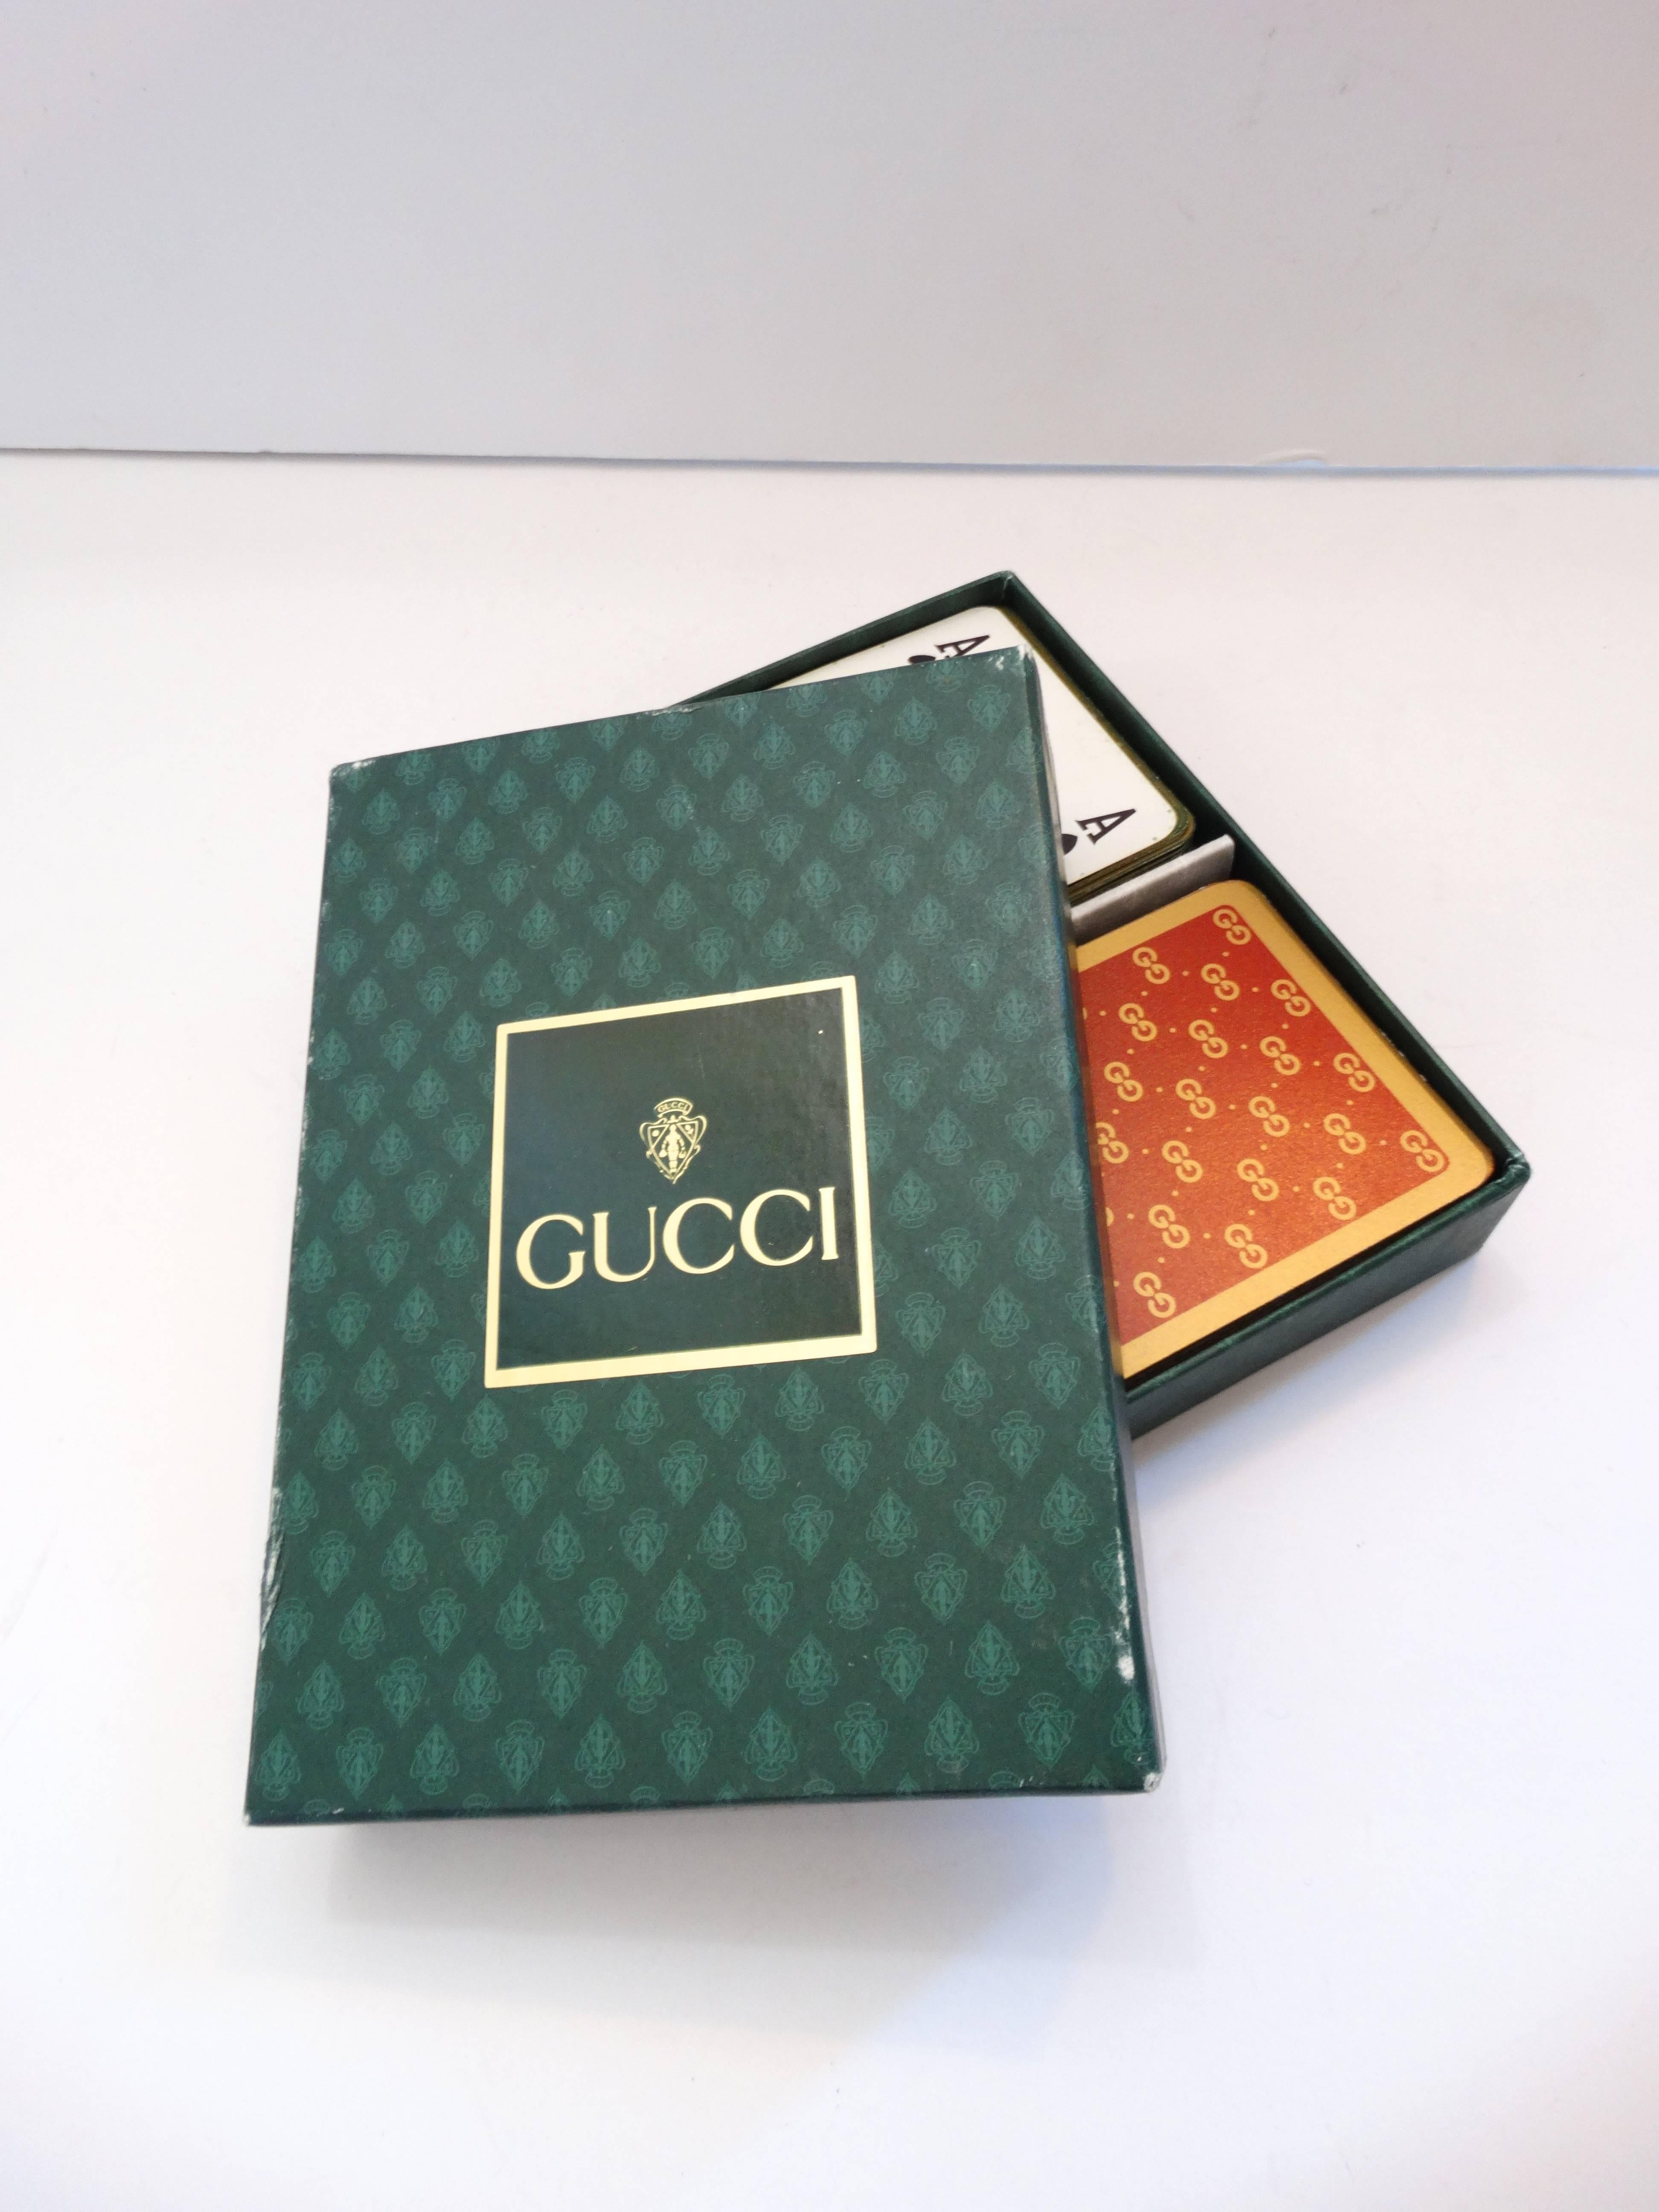 Aces up! Up your ante with our stylish 1970s Gucci monogram playing card set! Comes with two full sets of playing cards, one in red and one in green- both accented with gold Gucci monogram print and gold trim. Comes with original Gucci printed box